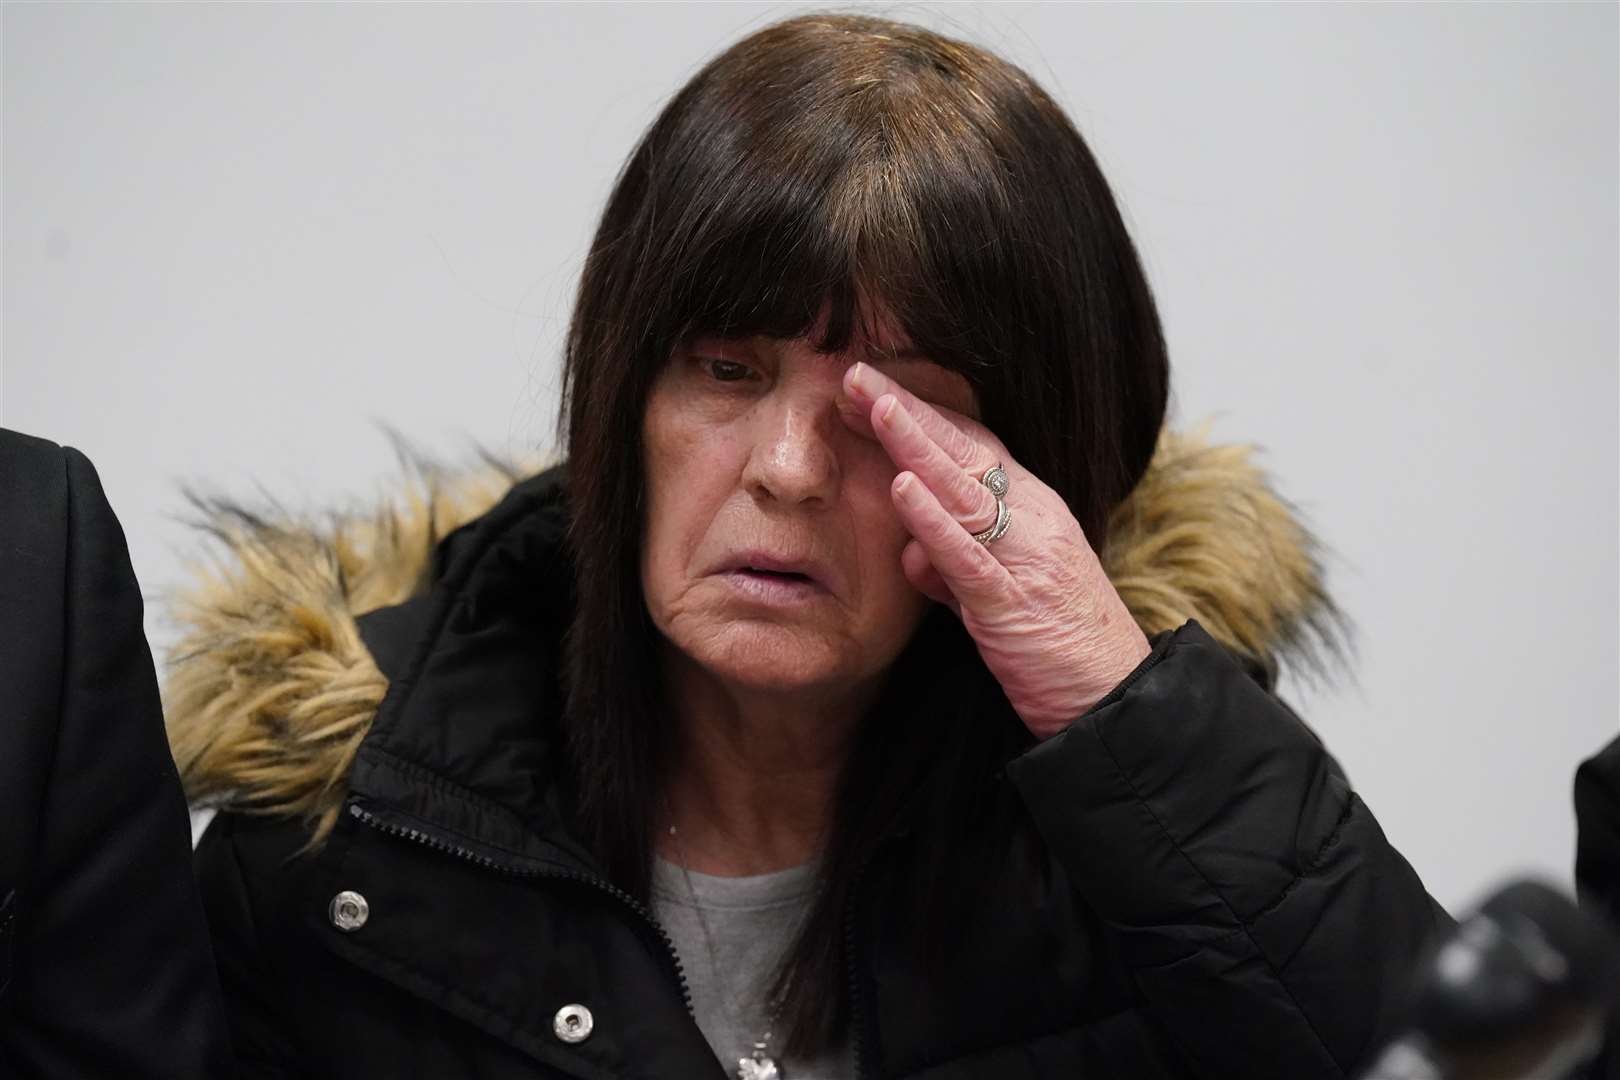 Jane Sneddon, the mother of Joseph Sneddon, wipes her eye during the press conference (Andrew Milligan/PA)